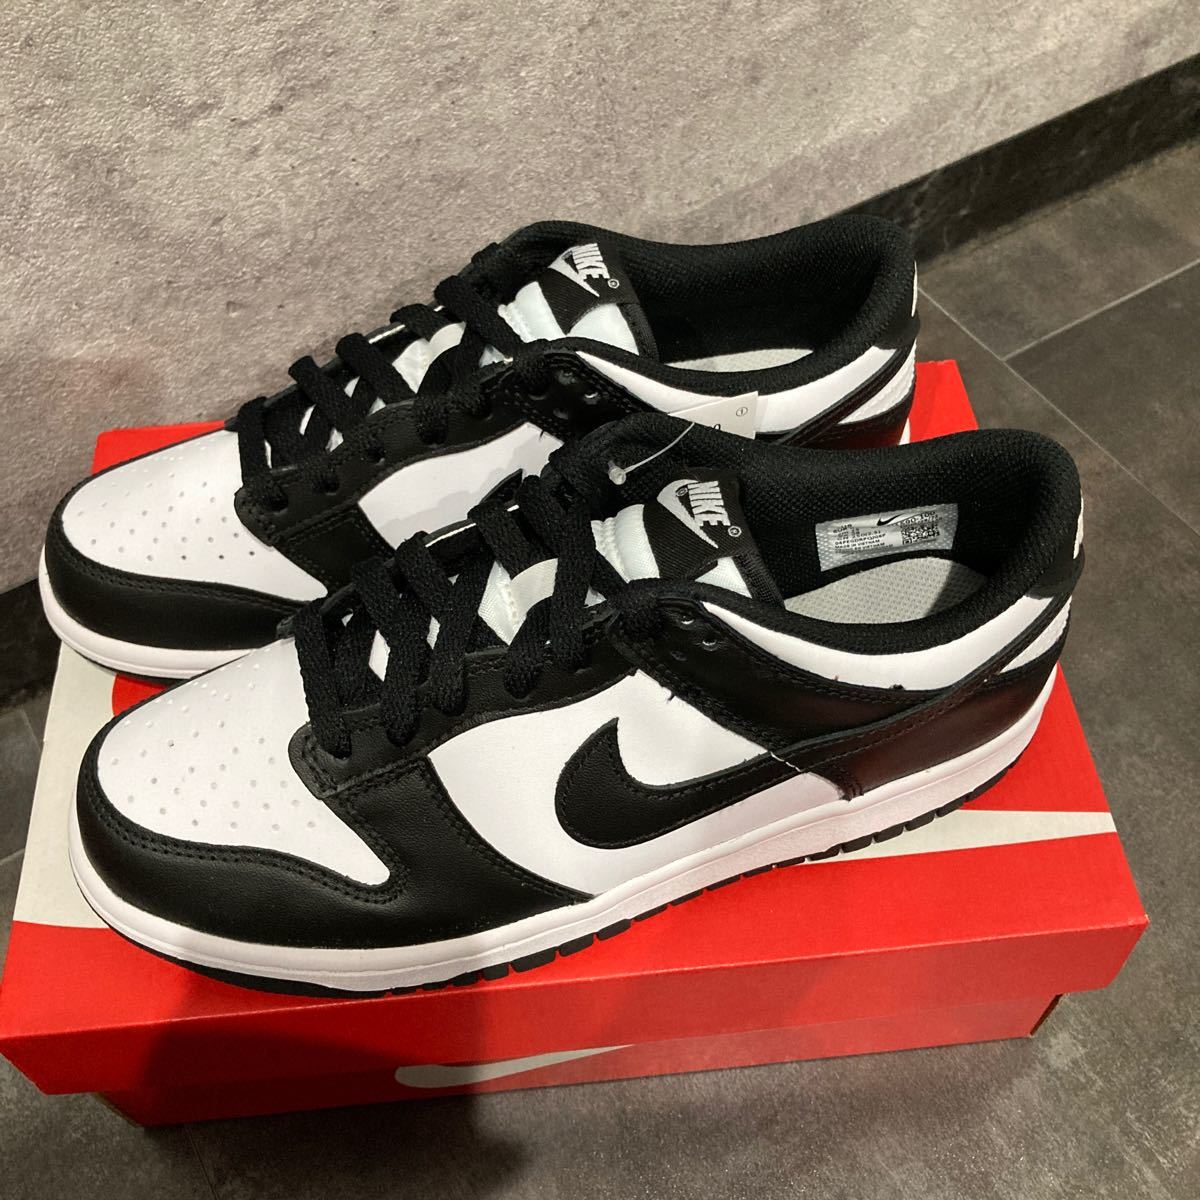 NIKE DUNK LOW PS ナイキ ダンクローキッズ パンダ 19㎝ sariater 